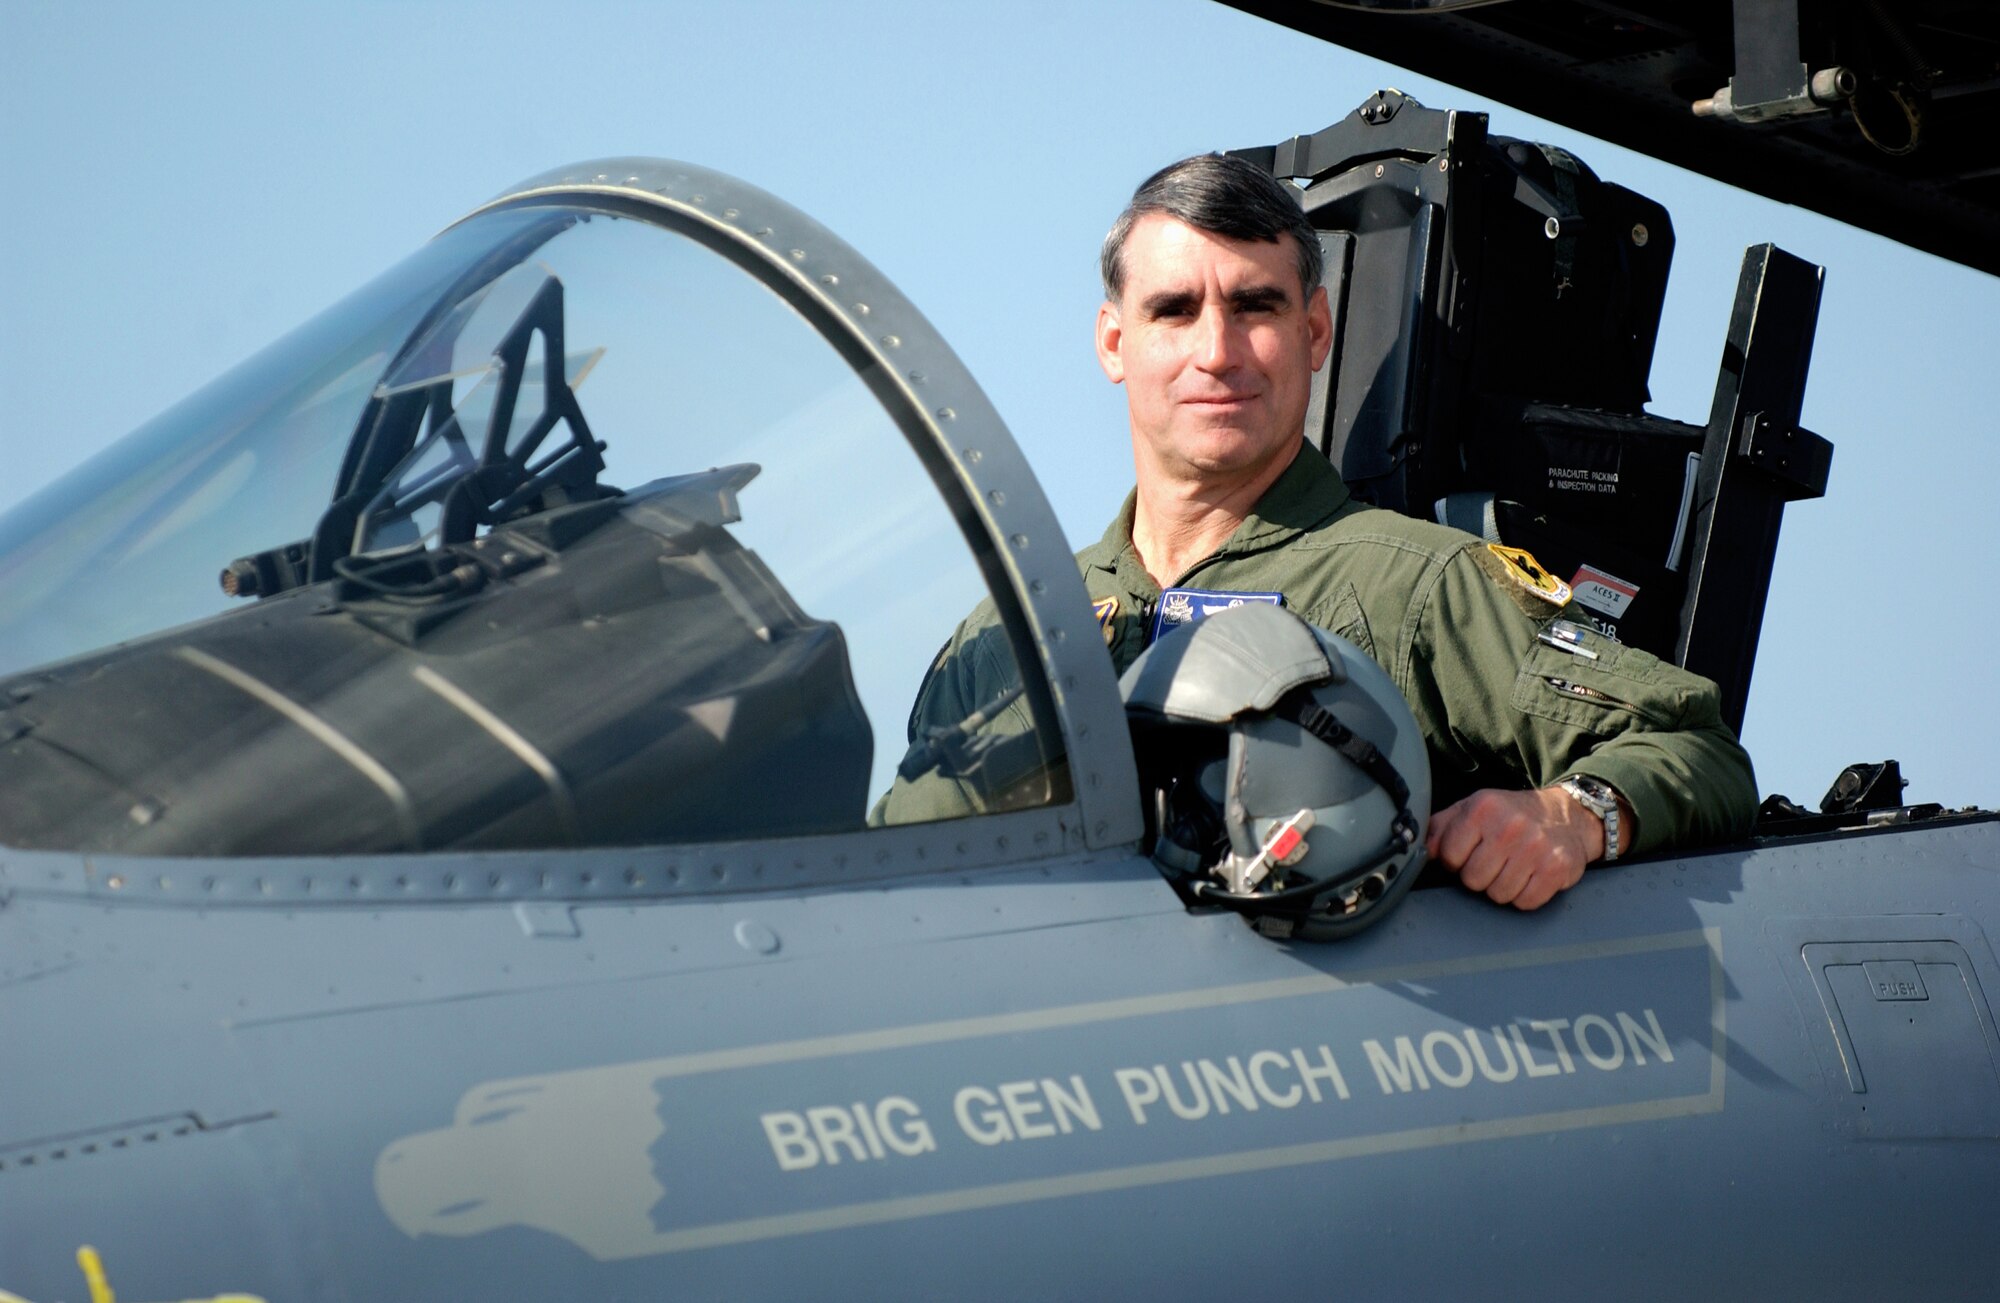 Brig. Gen. Harold "Punch" Moulton, 18th Wing commander since January 2006, will hand over command of the 18th Wing to Brig. Gen. Brett T. Williams on May 24.